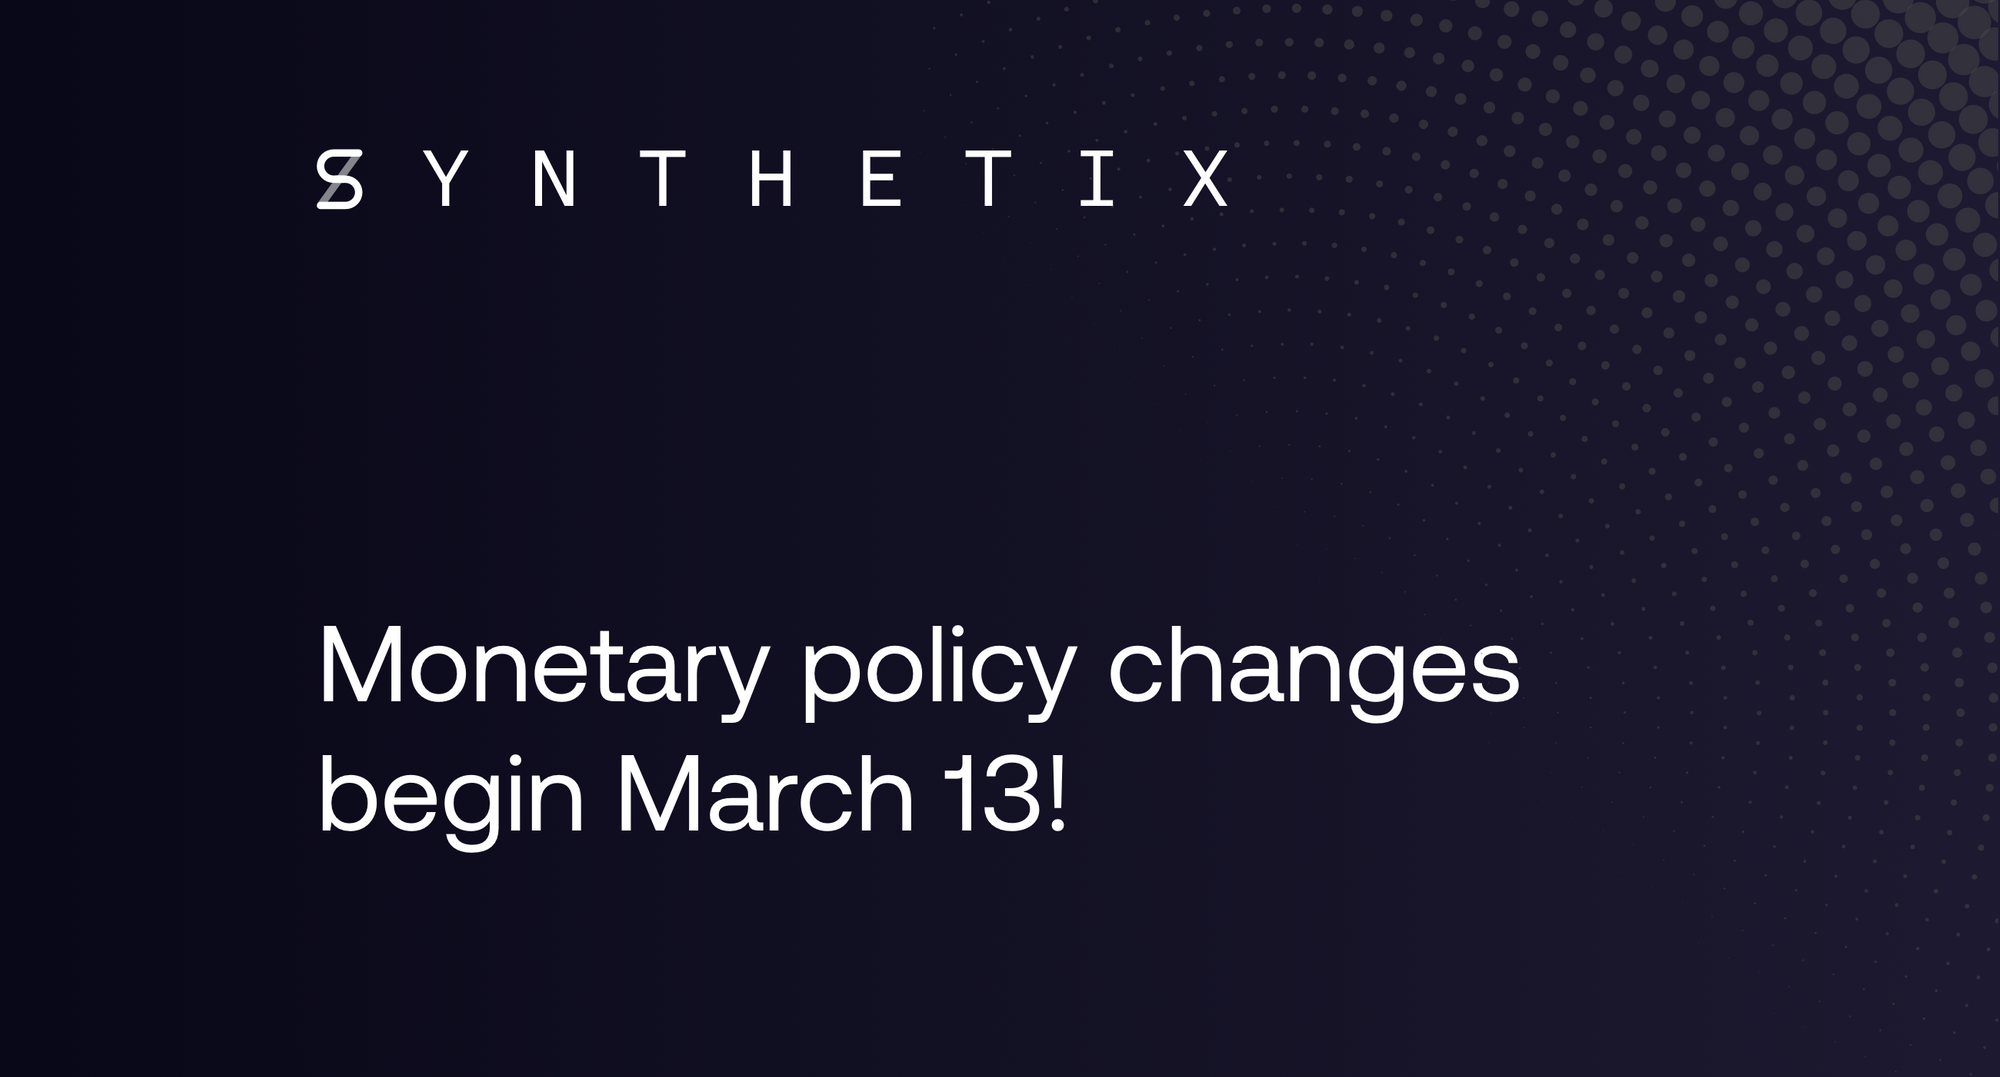 Monetary policy changes begin March 13!